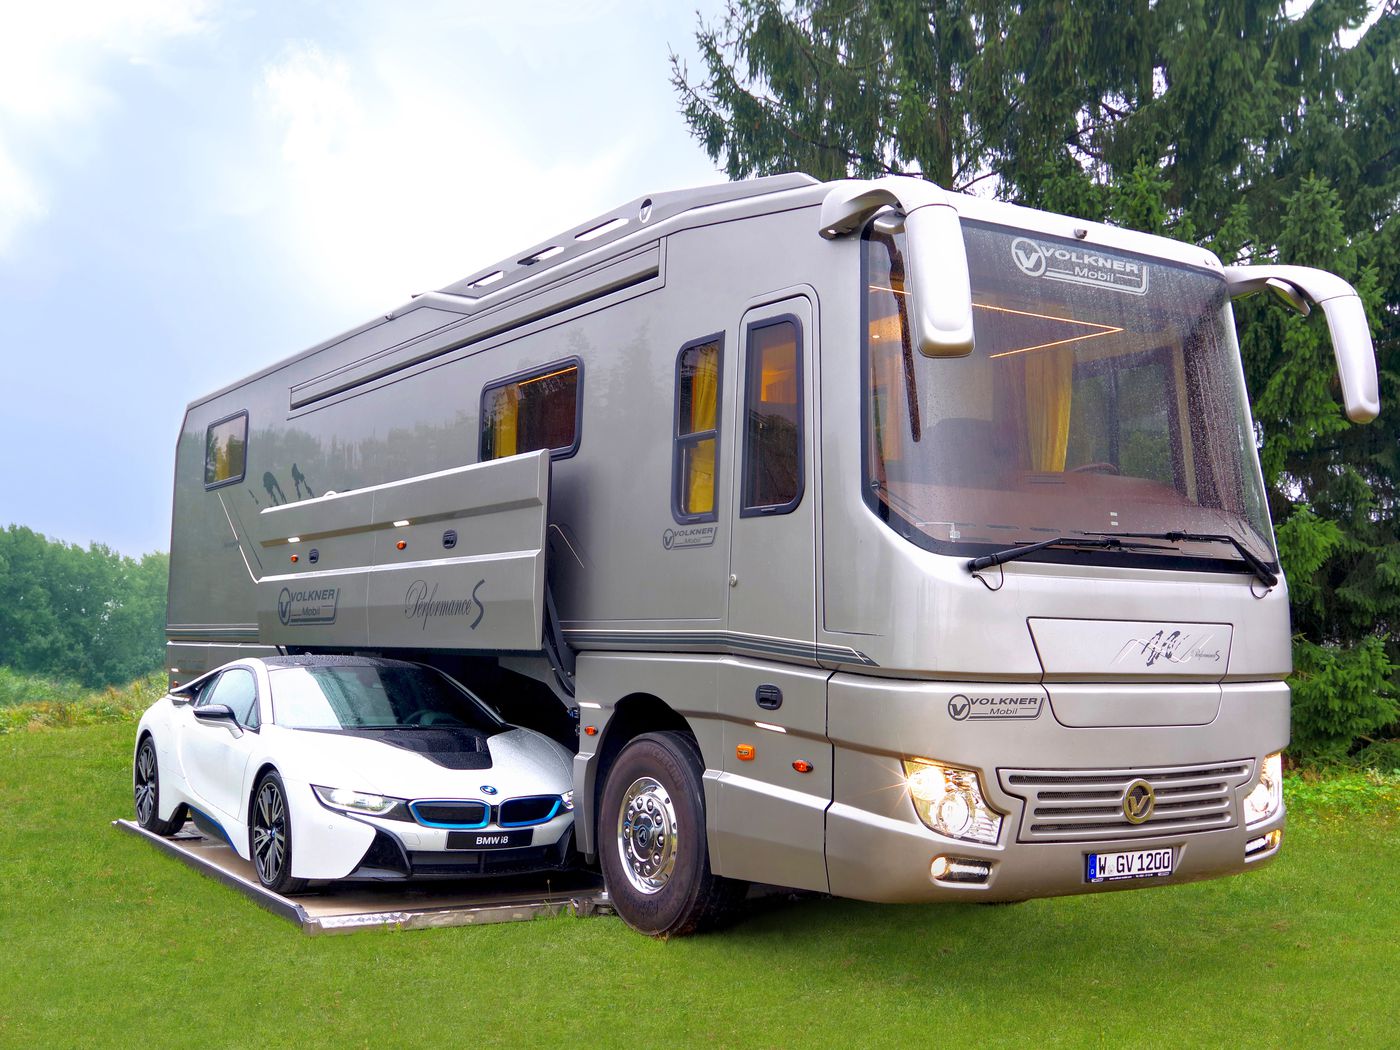 Bespoke Rv Hides Sports Car In Mobile Garage Curbed